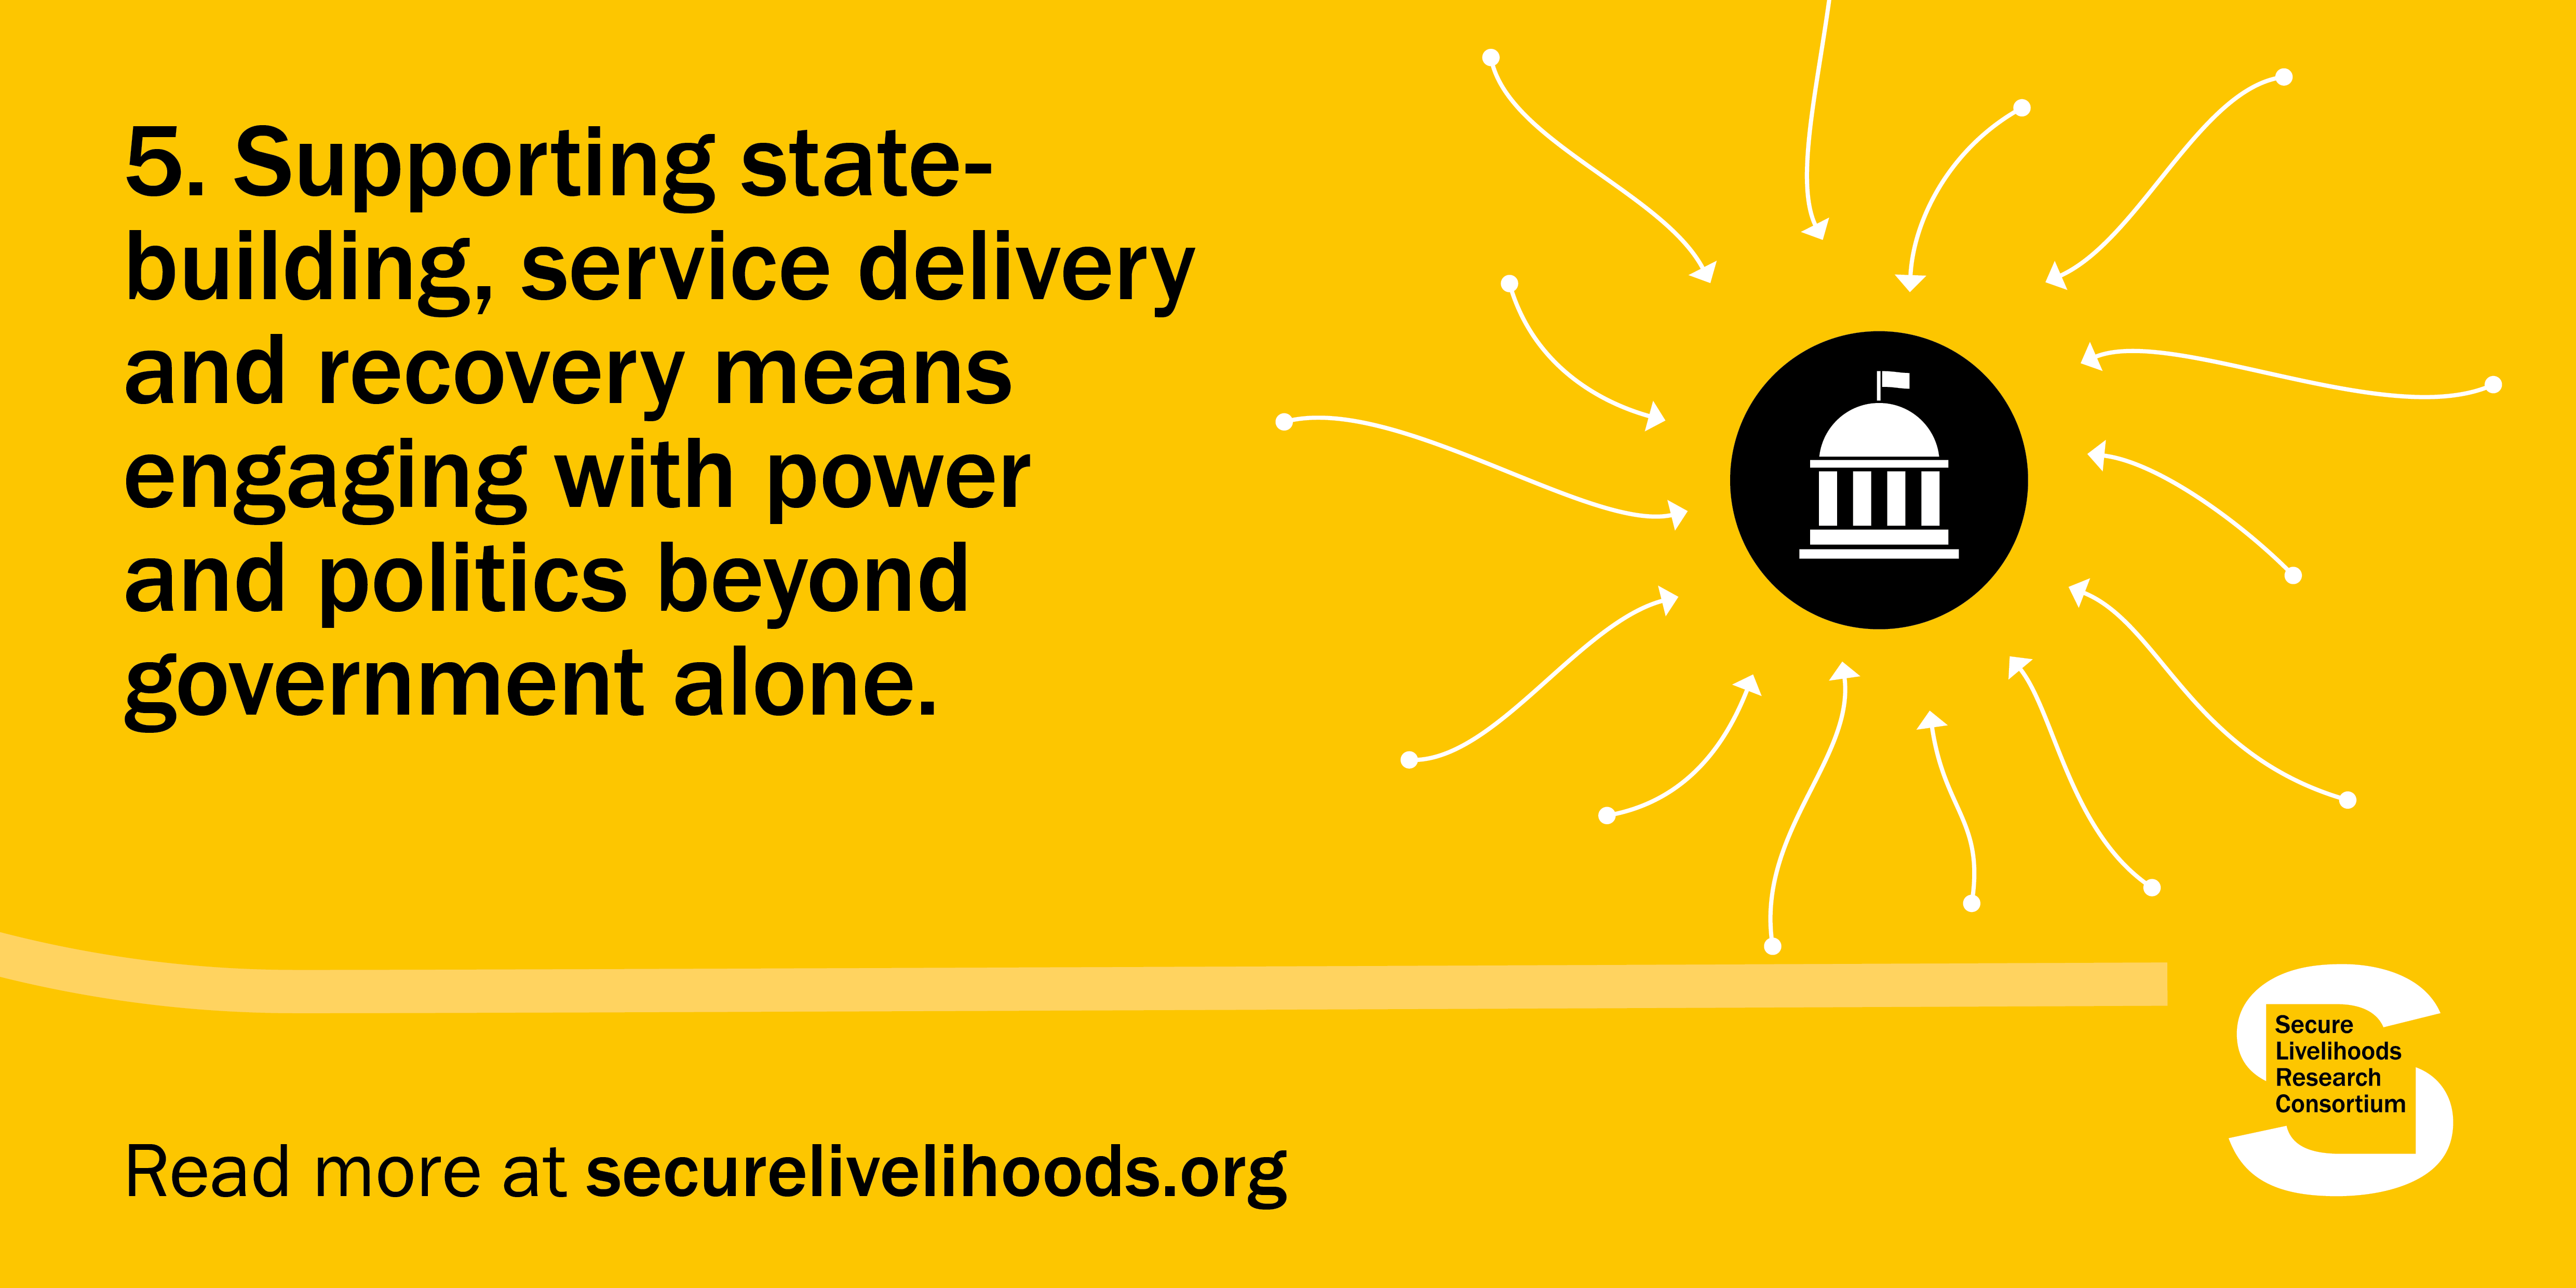 Supporting state-building, service delivery and recovery means engaging with power and politics beyond government alone